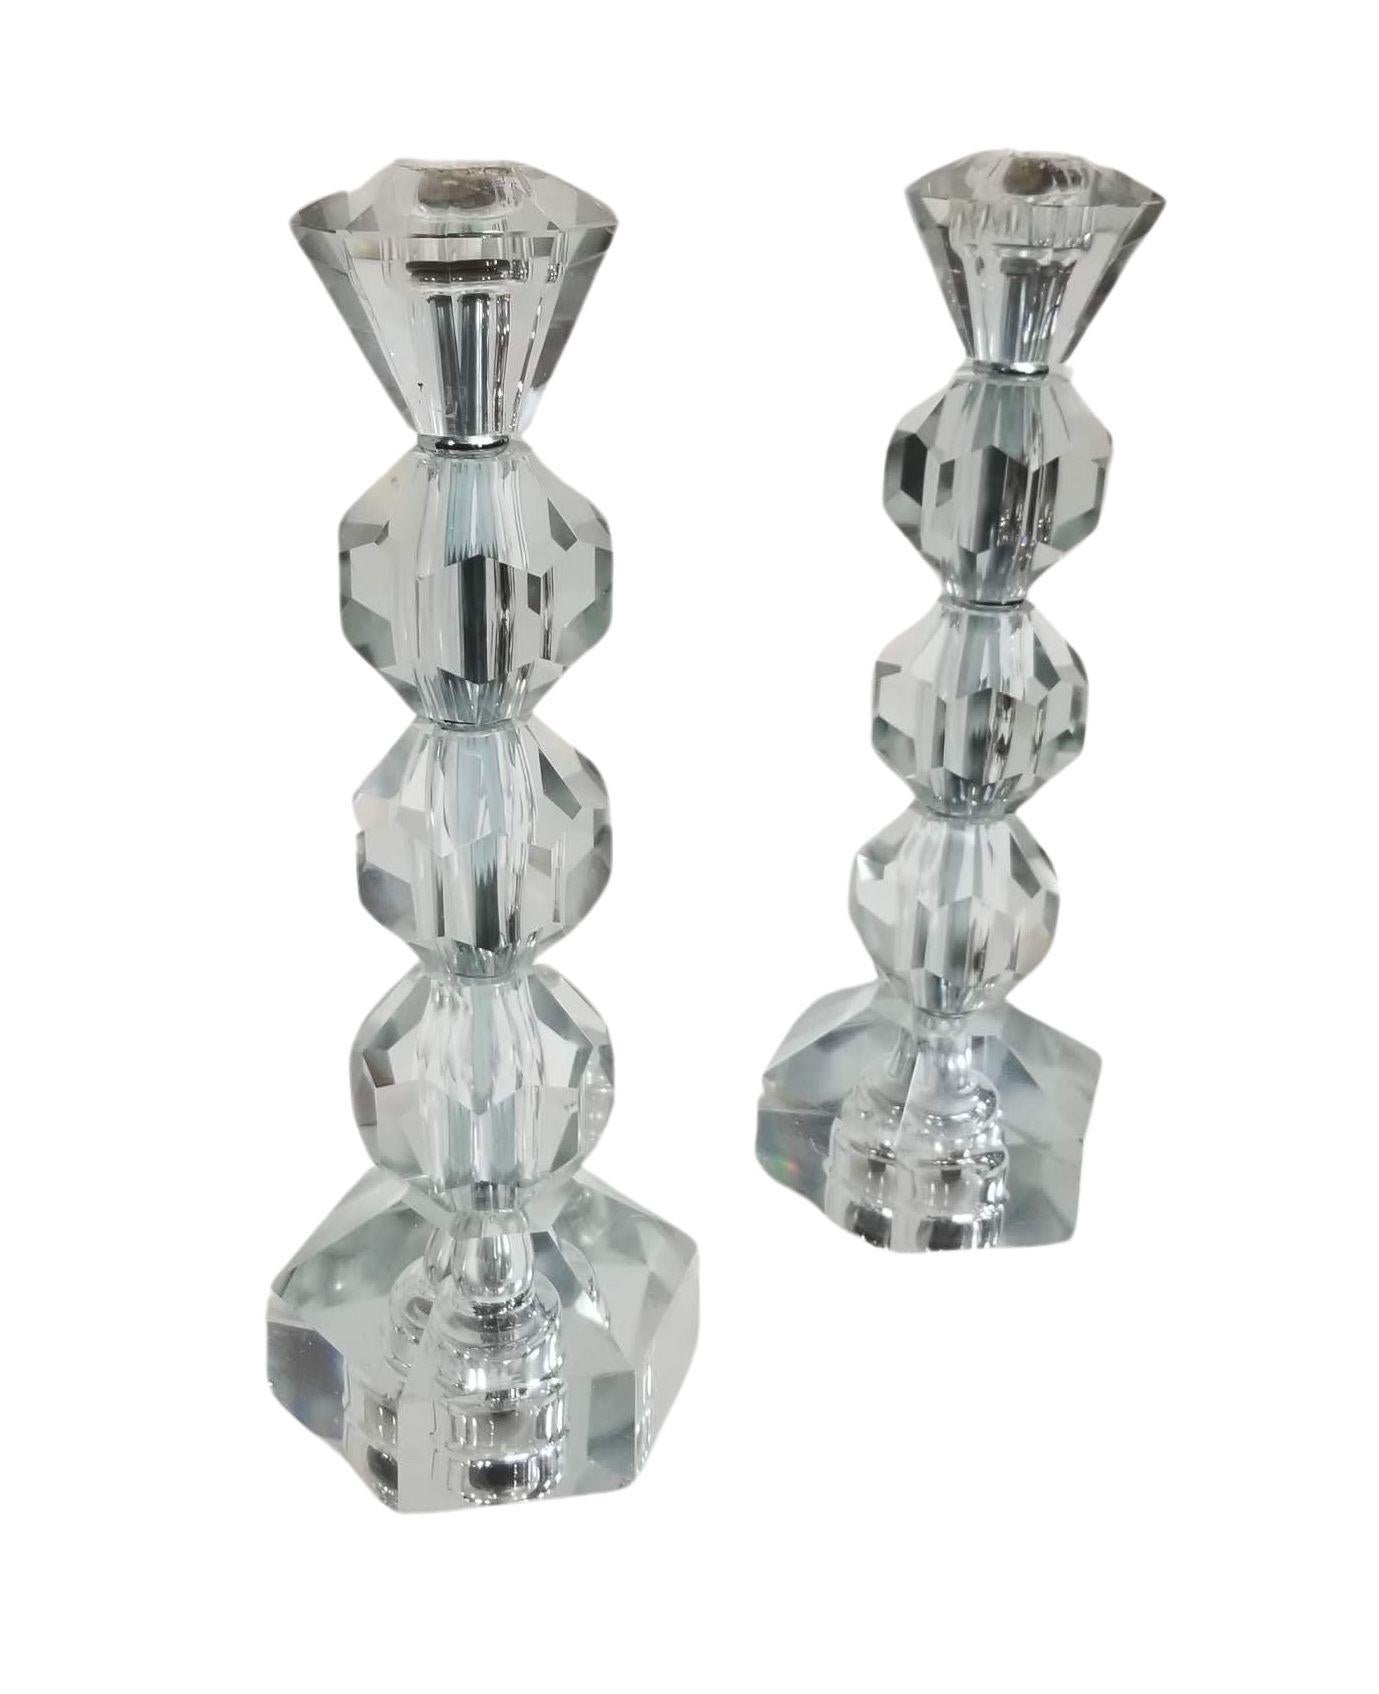 Elevate your decor with this exquisite pair of Mid Century Modern candlesticks featuring cut glass with a distinctive diamond-shaped top. These timeless pieces seamlessly blend vintage charm with modern sophistication, adding a touch of elegance to